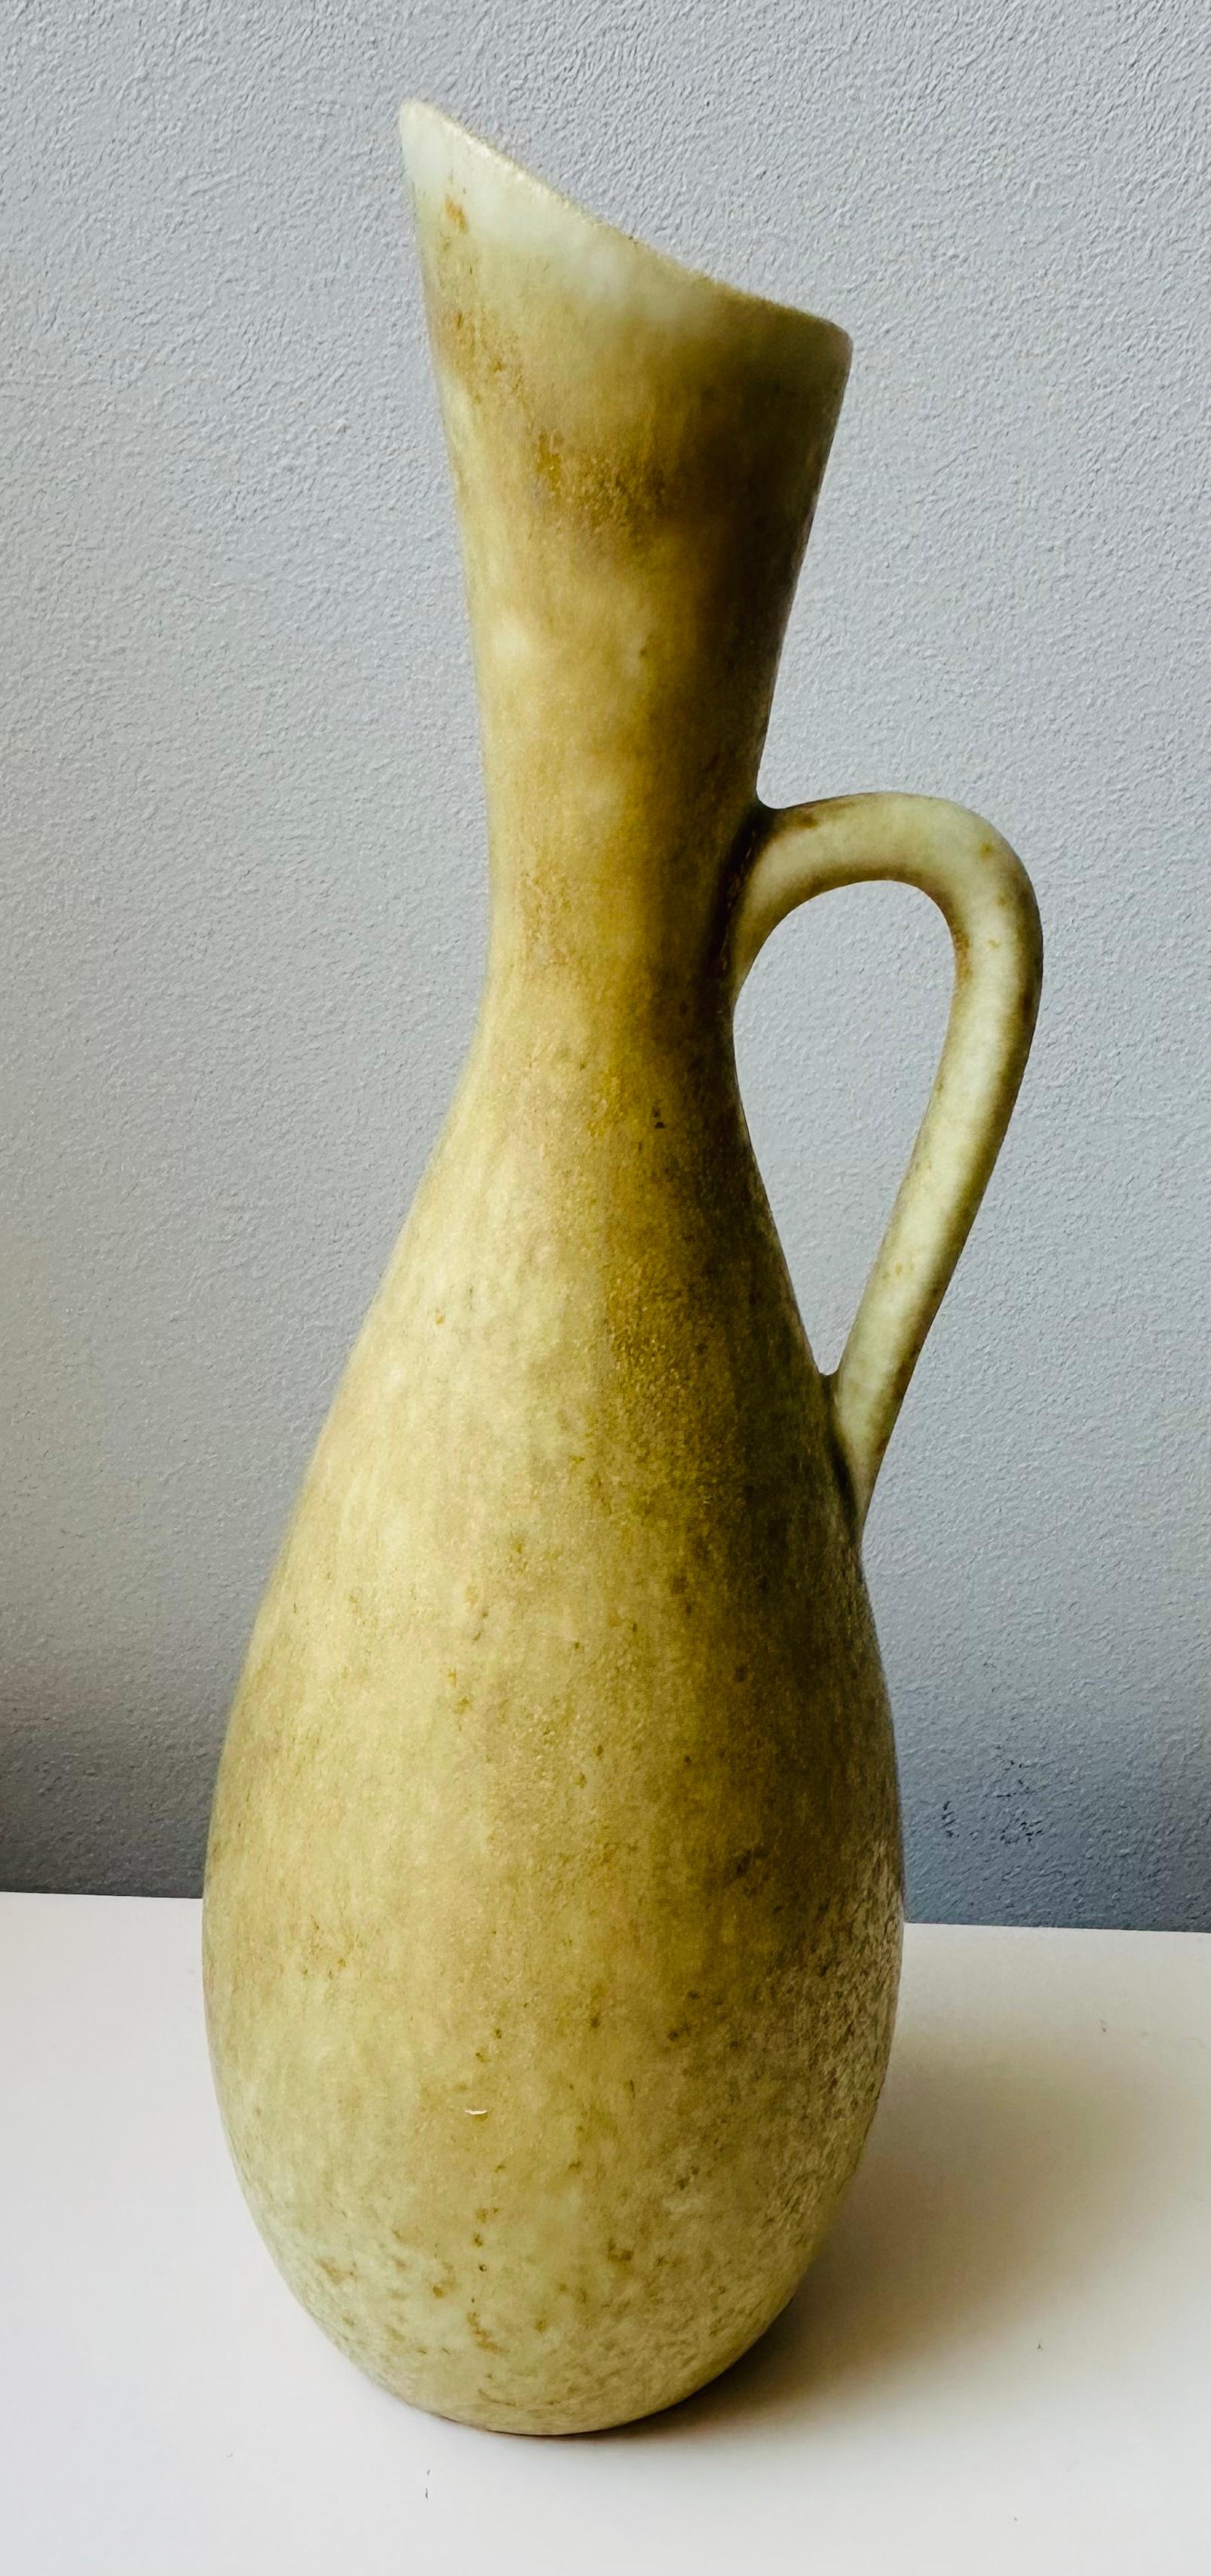 A beautiful mottled-yellow 1950s Swedish handle-jug designed by Carl-Harry Stålhane for the Rörstrand Factory.  The pottery, stoneware jug, features a wonderful smooth and tactile glaze in subtle marble effect yellow tones.  Inscribed on the base: 